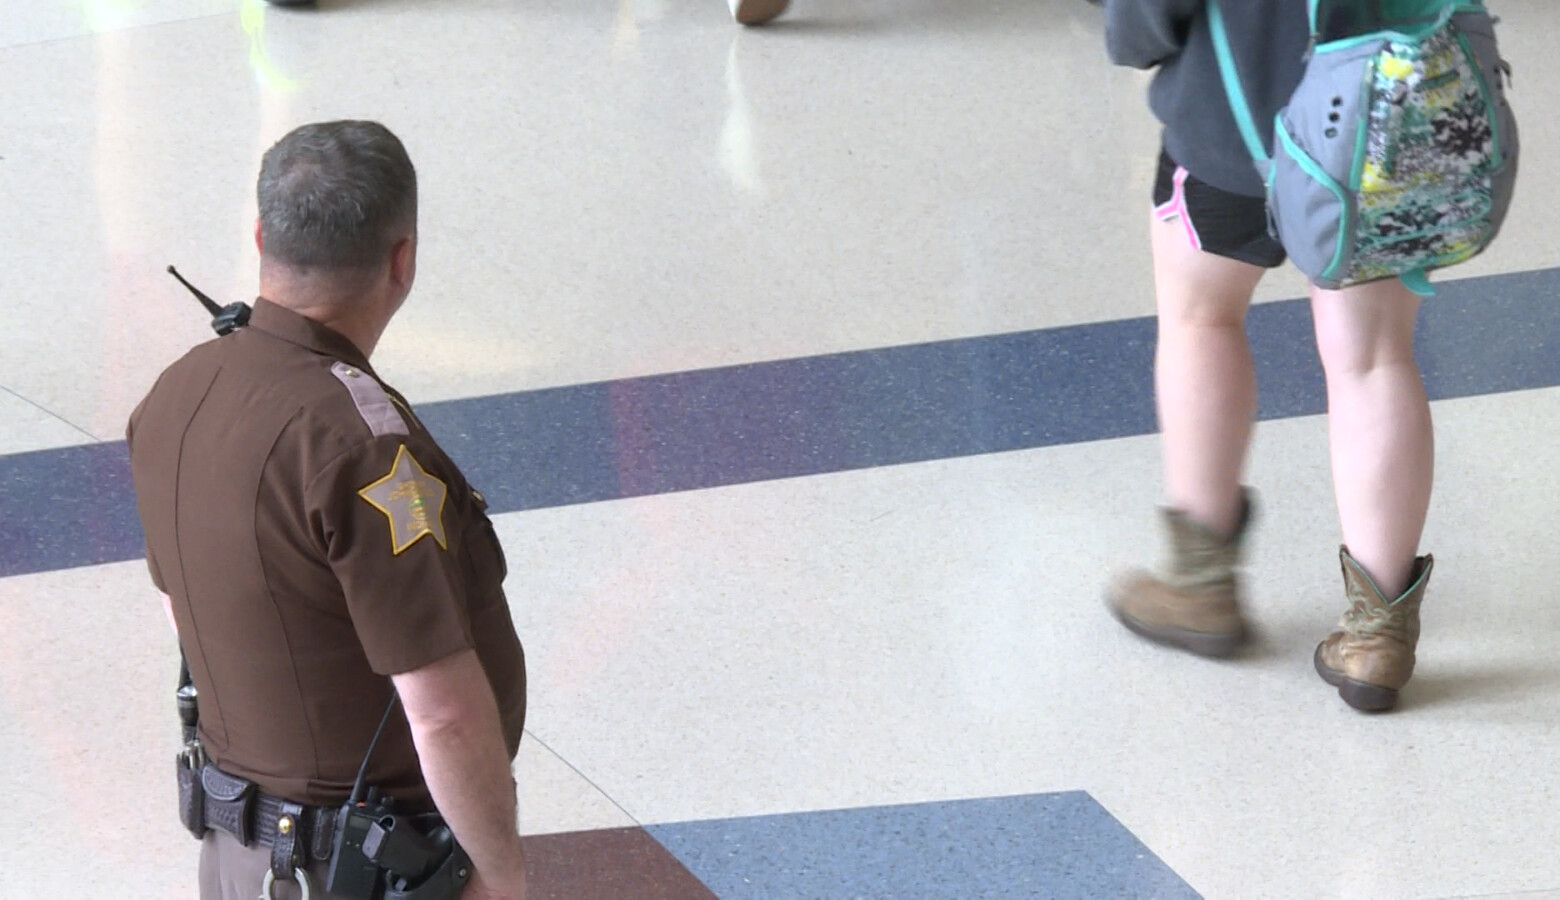 Schools across the country began using resource officers in the 1950s, with school-based policing efforts growing increasingly popular in the aftermath of school shootings. (Jeanie Lindsay/IPB News)